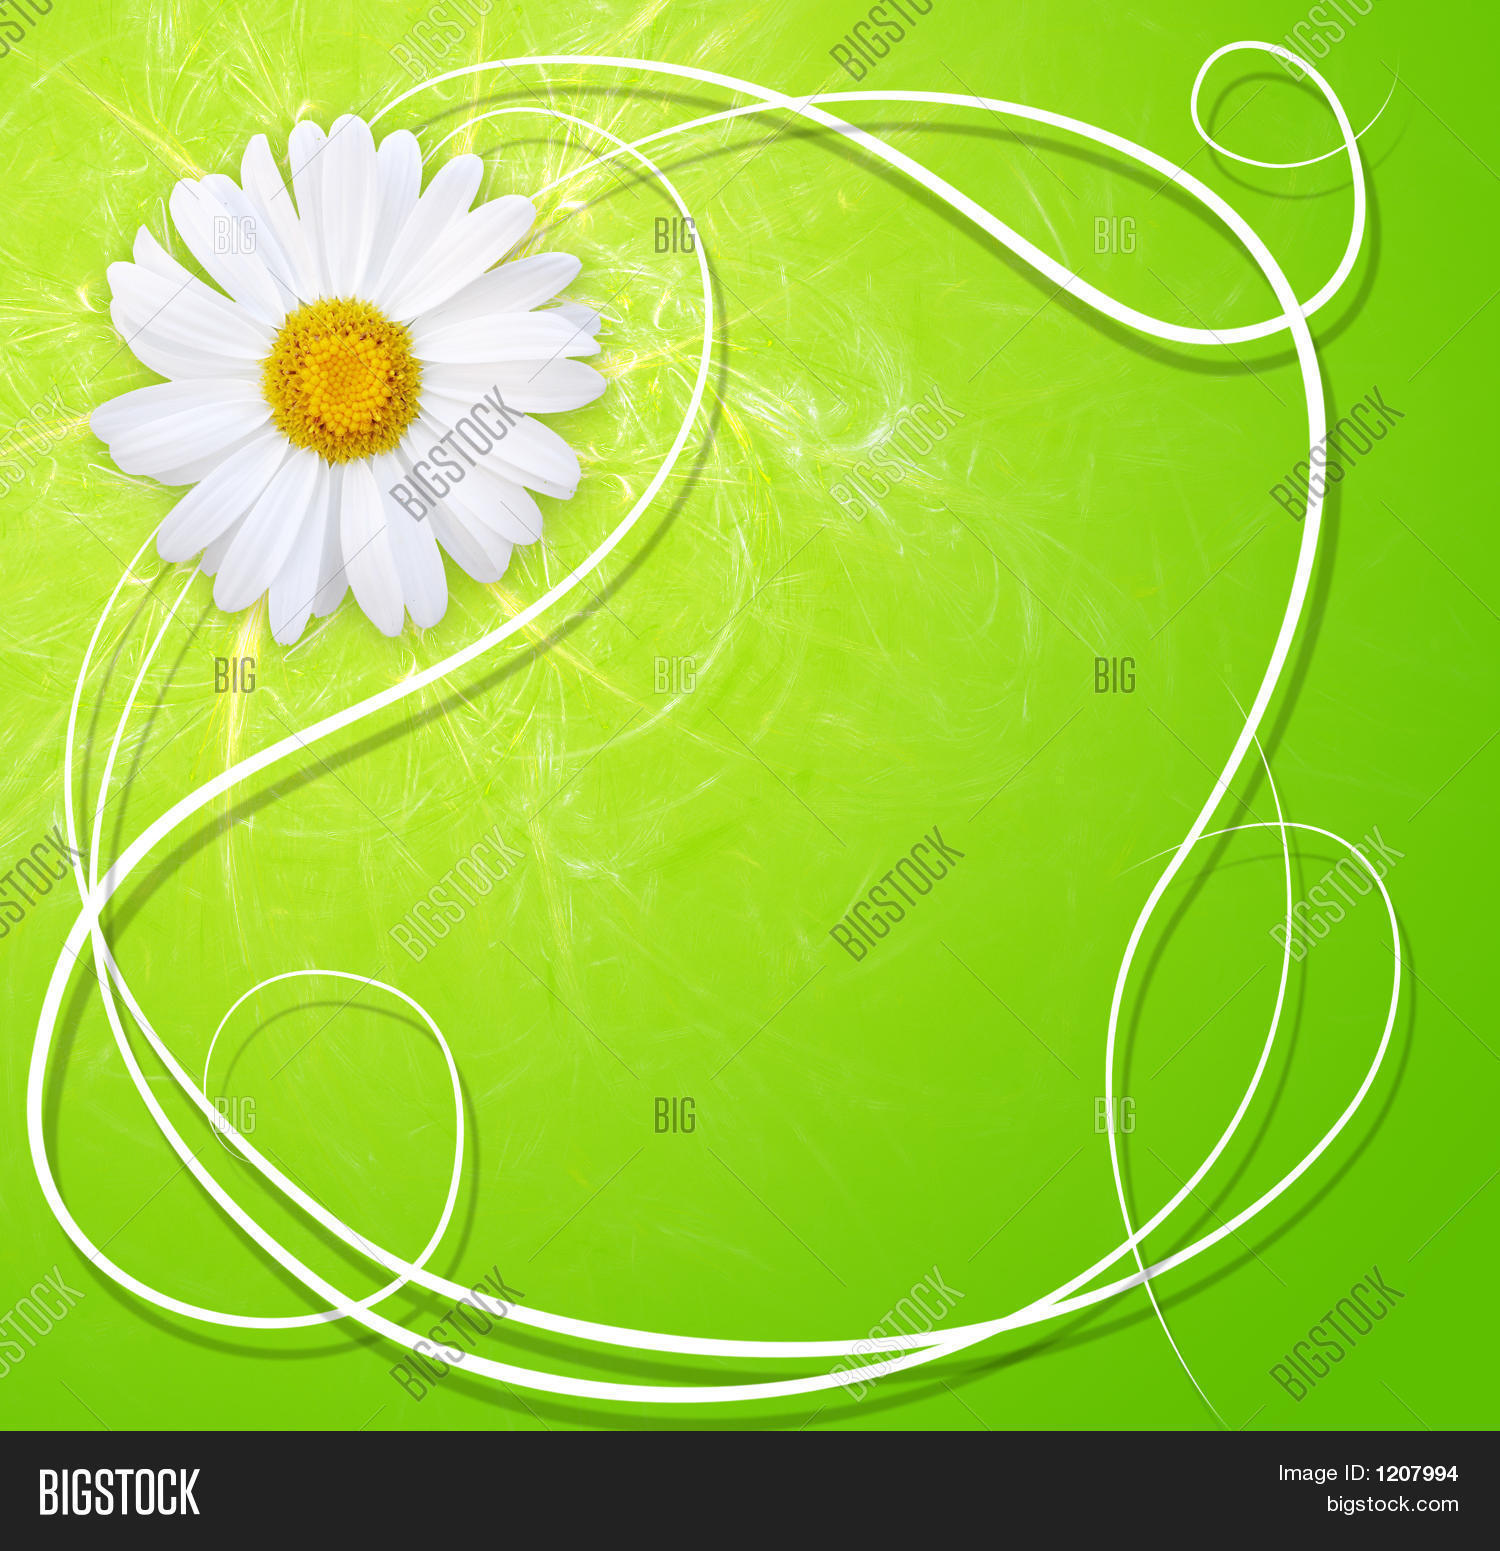 PowerPoint Template: Fresh spring background with marguerite (bcaxzze)